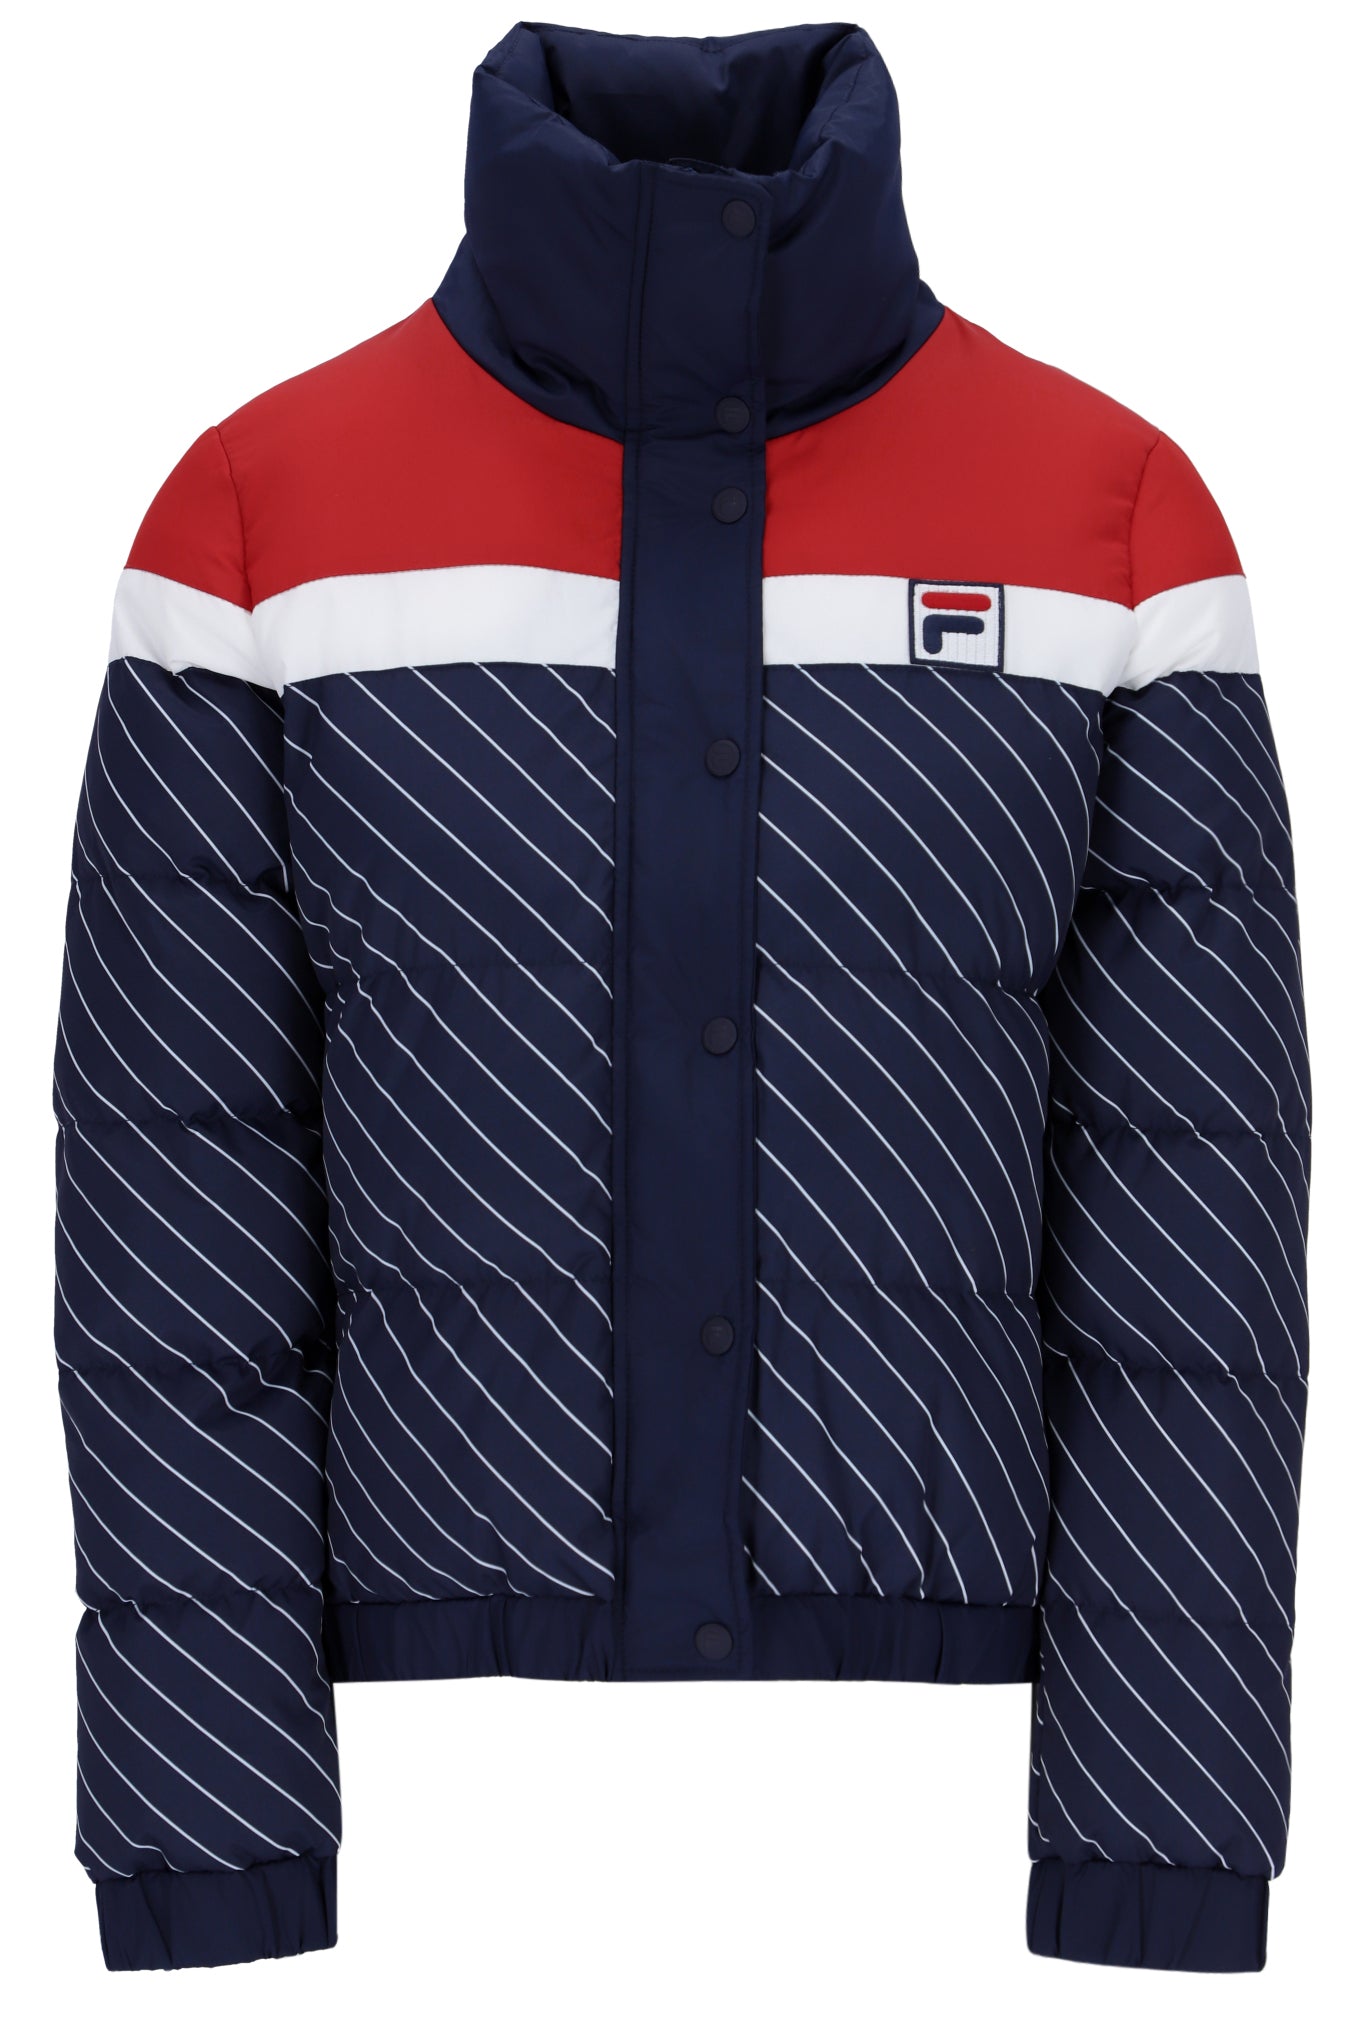 Ladies Lottie Puffa Jacket Navy/White/Red-Ghost Front View